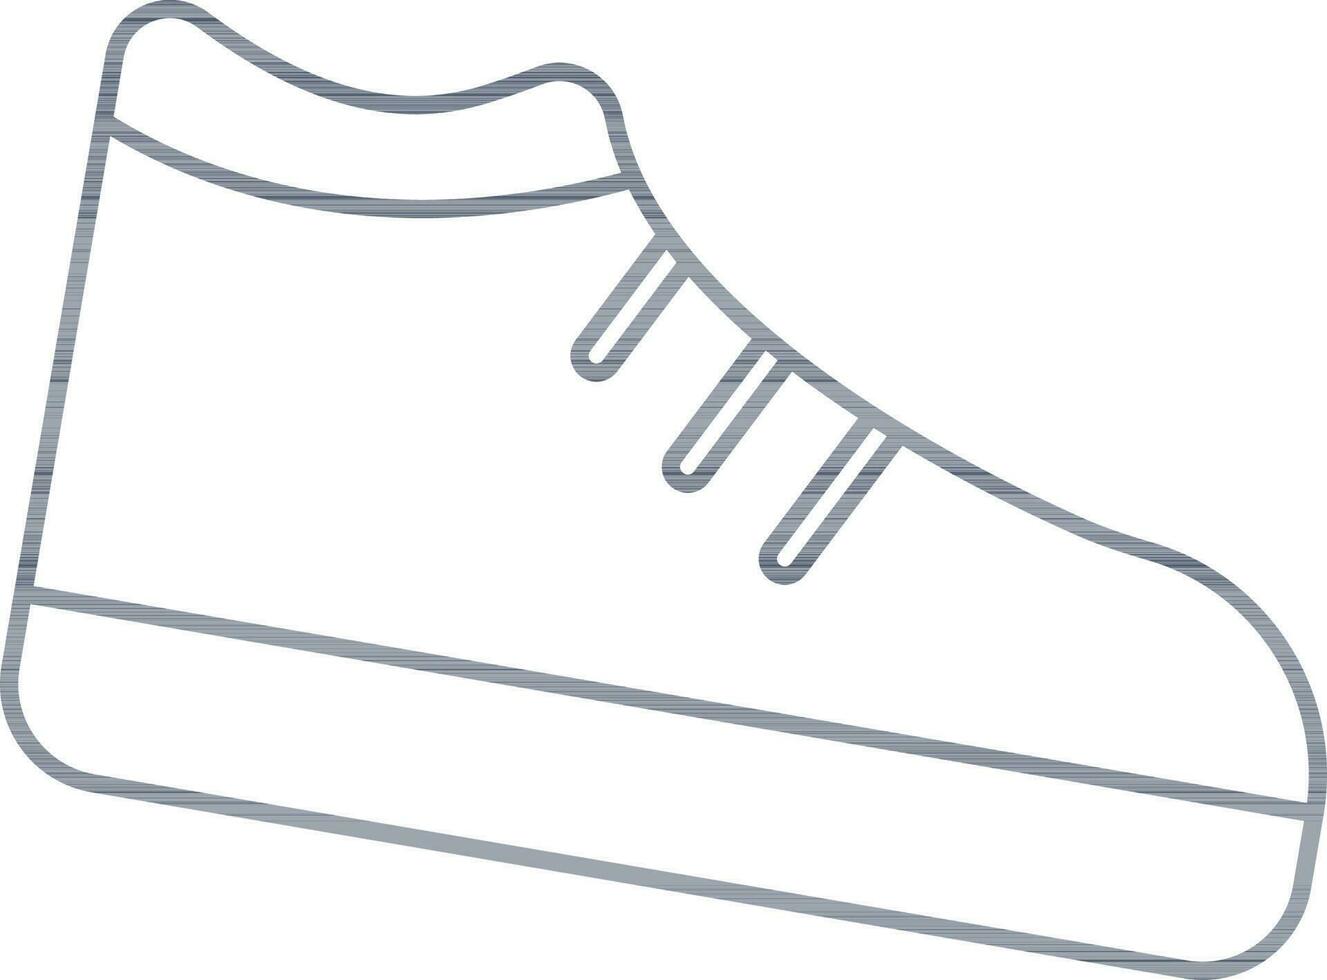 Illustration Of Shoes Icon In Line Art. vector